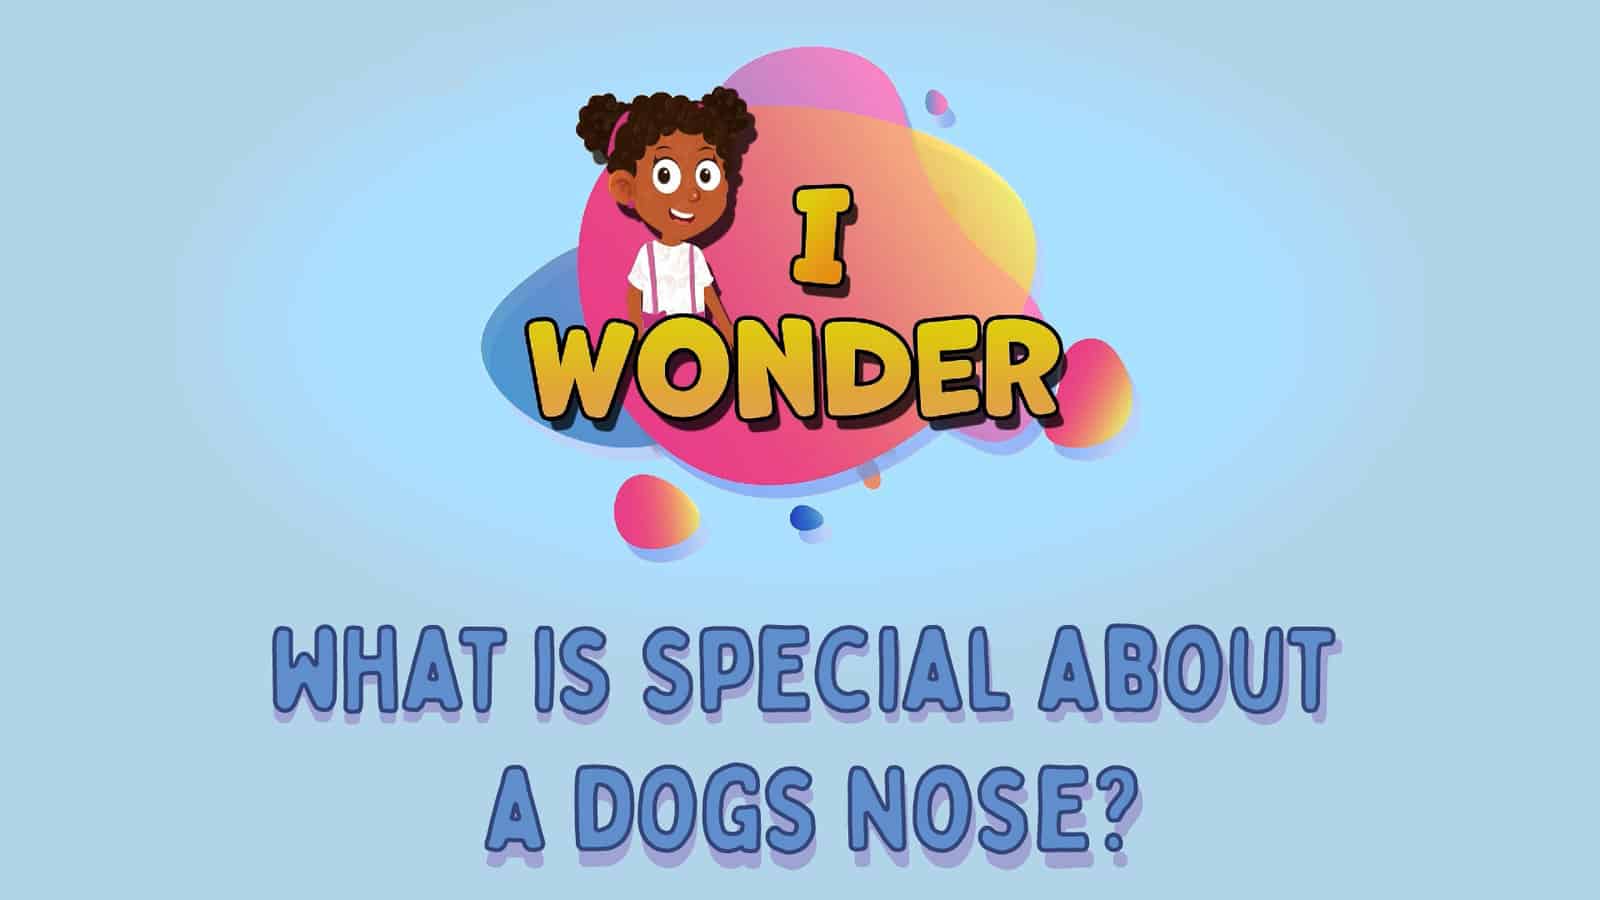 About A Dog's Nose LearningMole